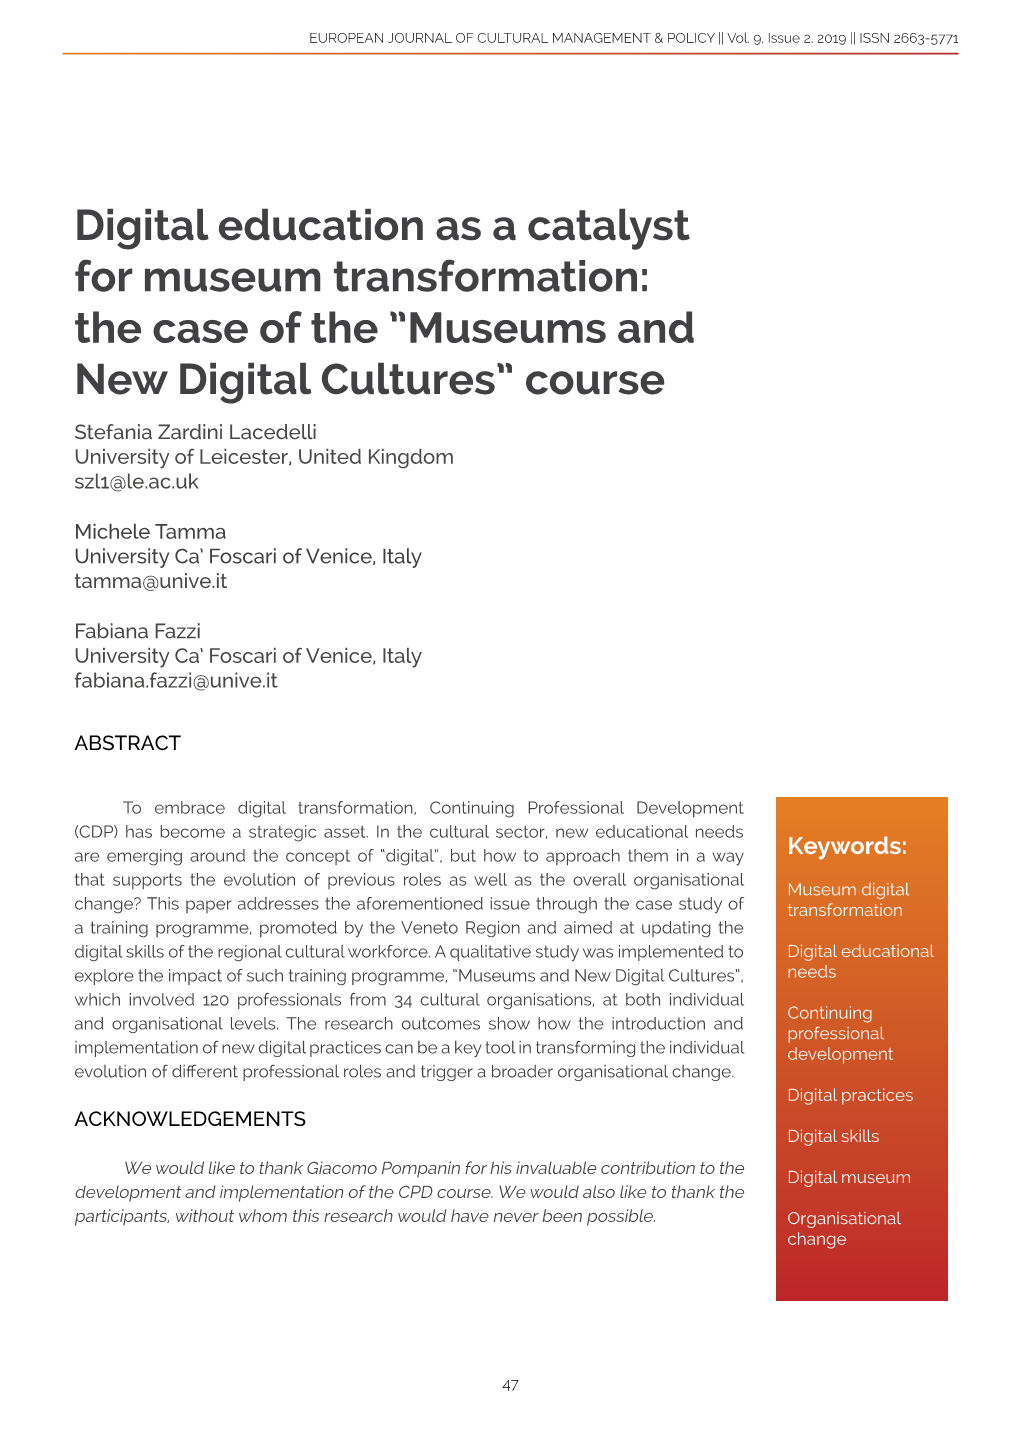 Digital Education As a Catalyst for Museum Transformation